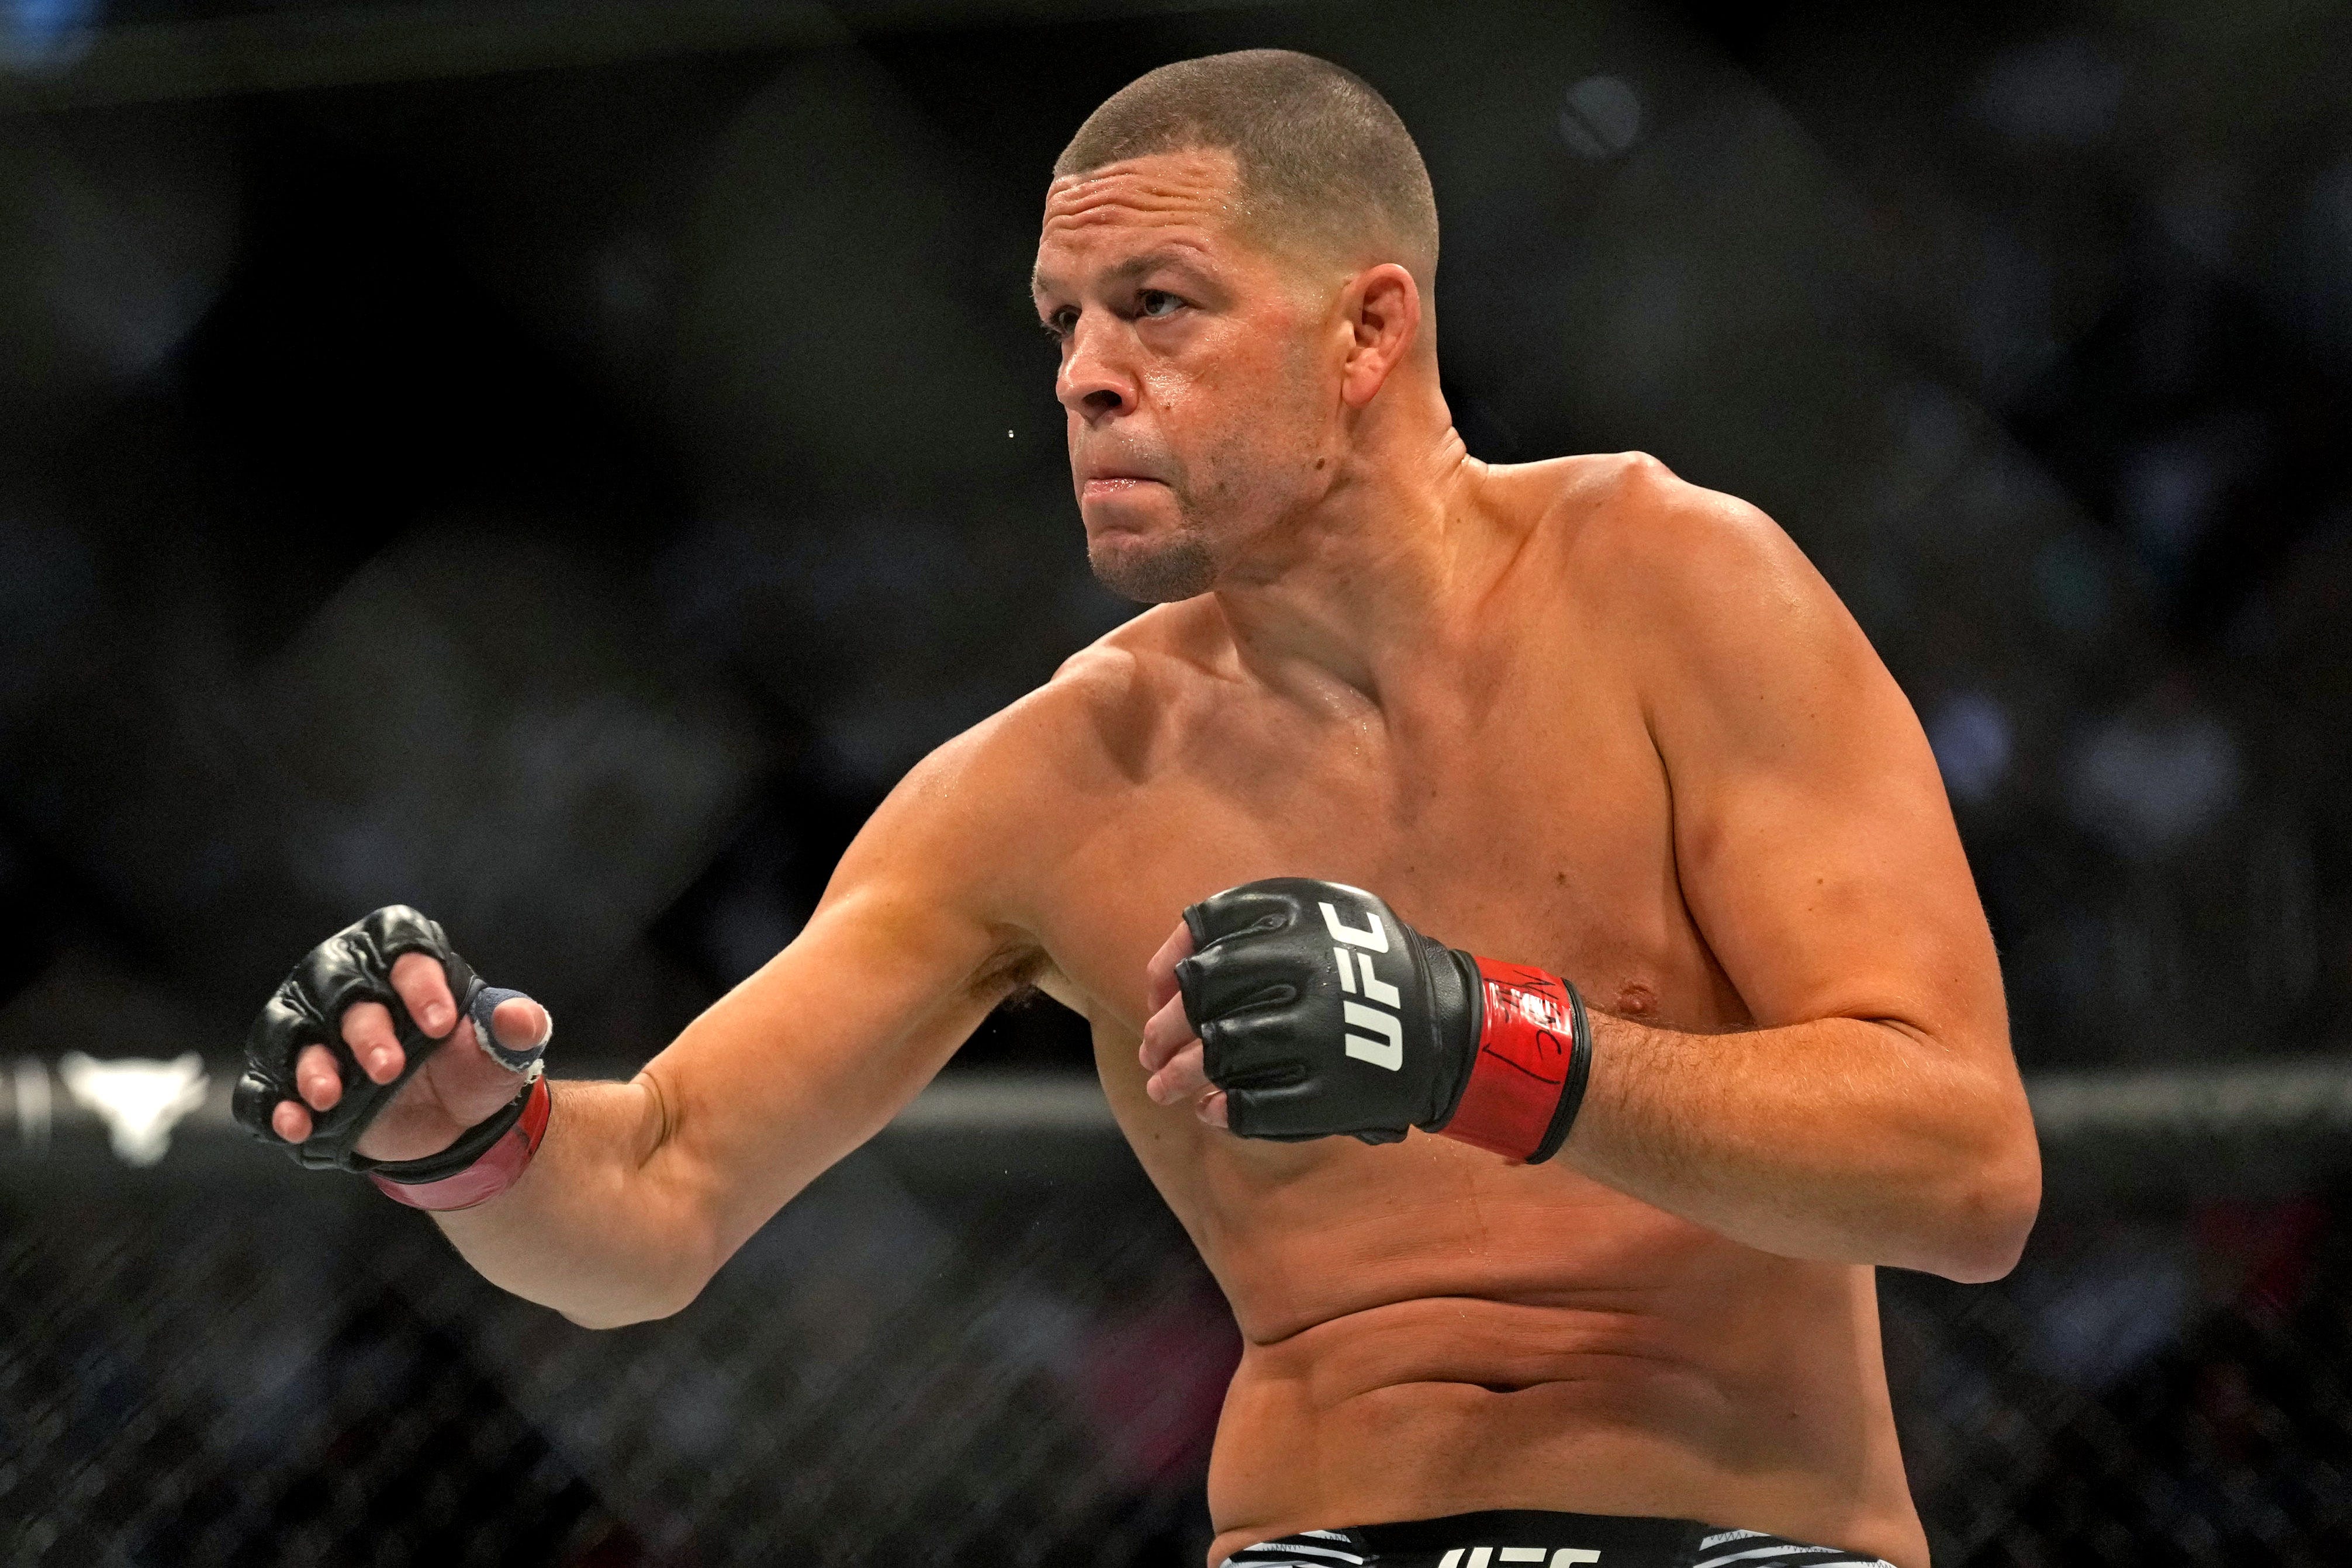 Arrest warrant issued for Nate Diaz in New Orleans